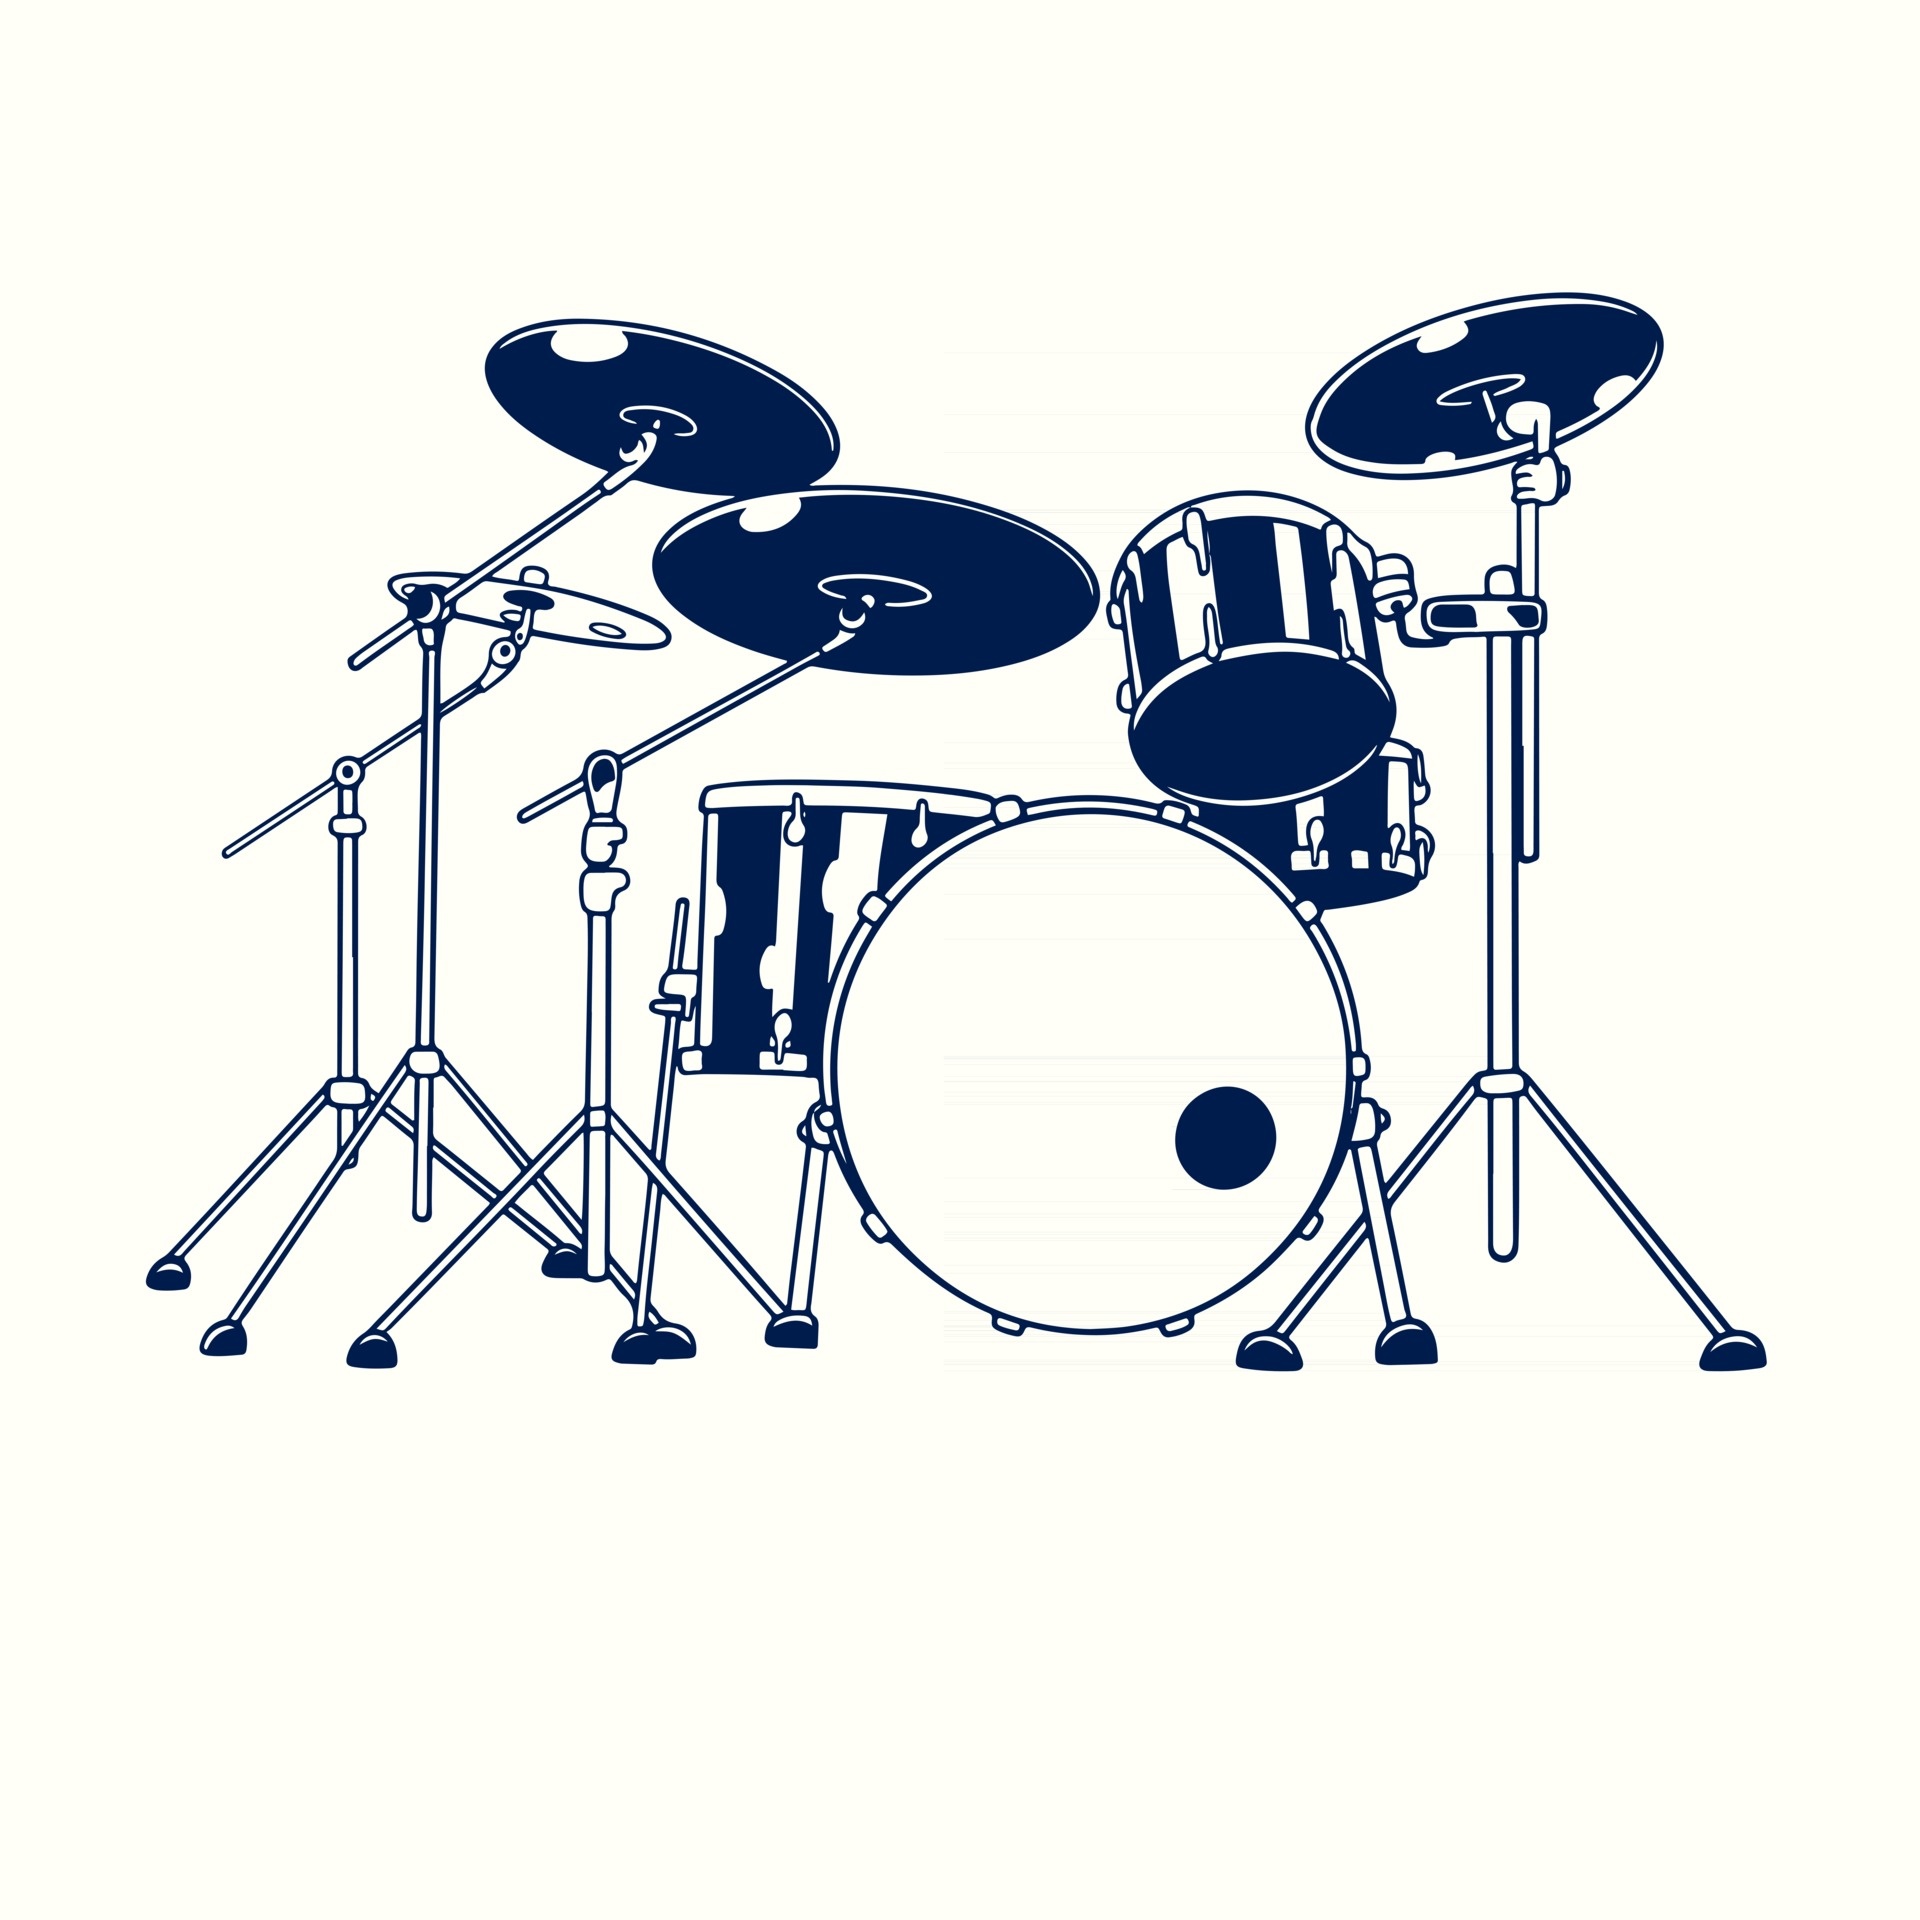 Bass Drum: A collection of percussion instruments, Black and white, Tom-toms, Cymbals. 1920x1920 HD Wallpaper.